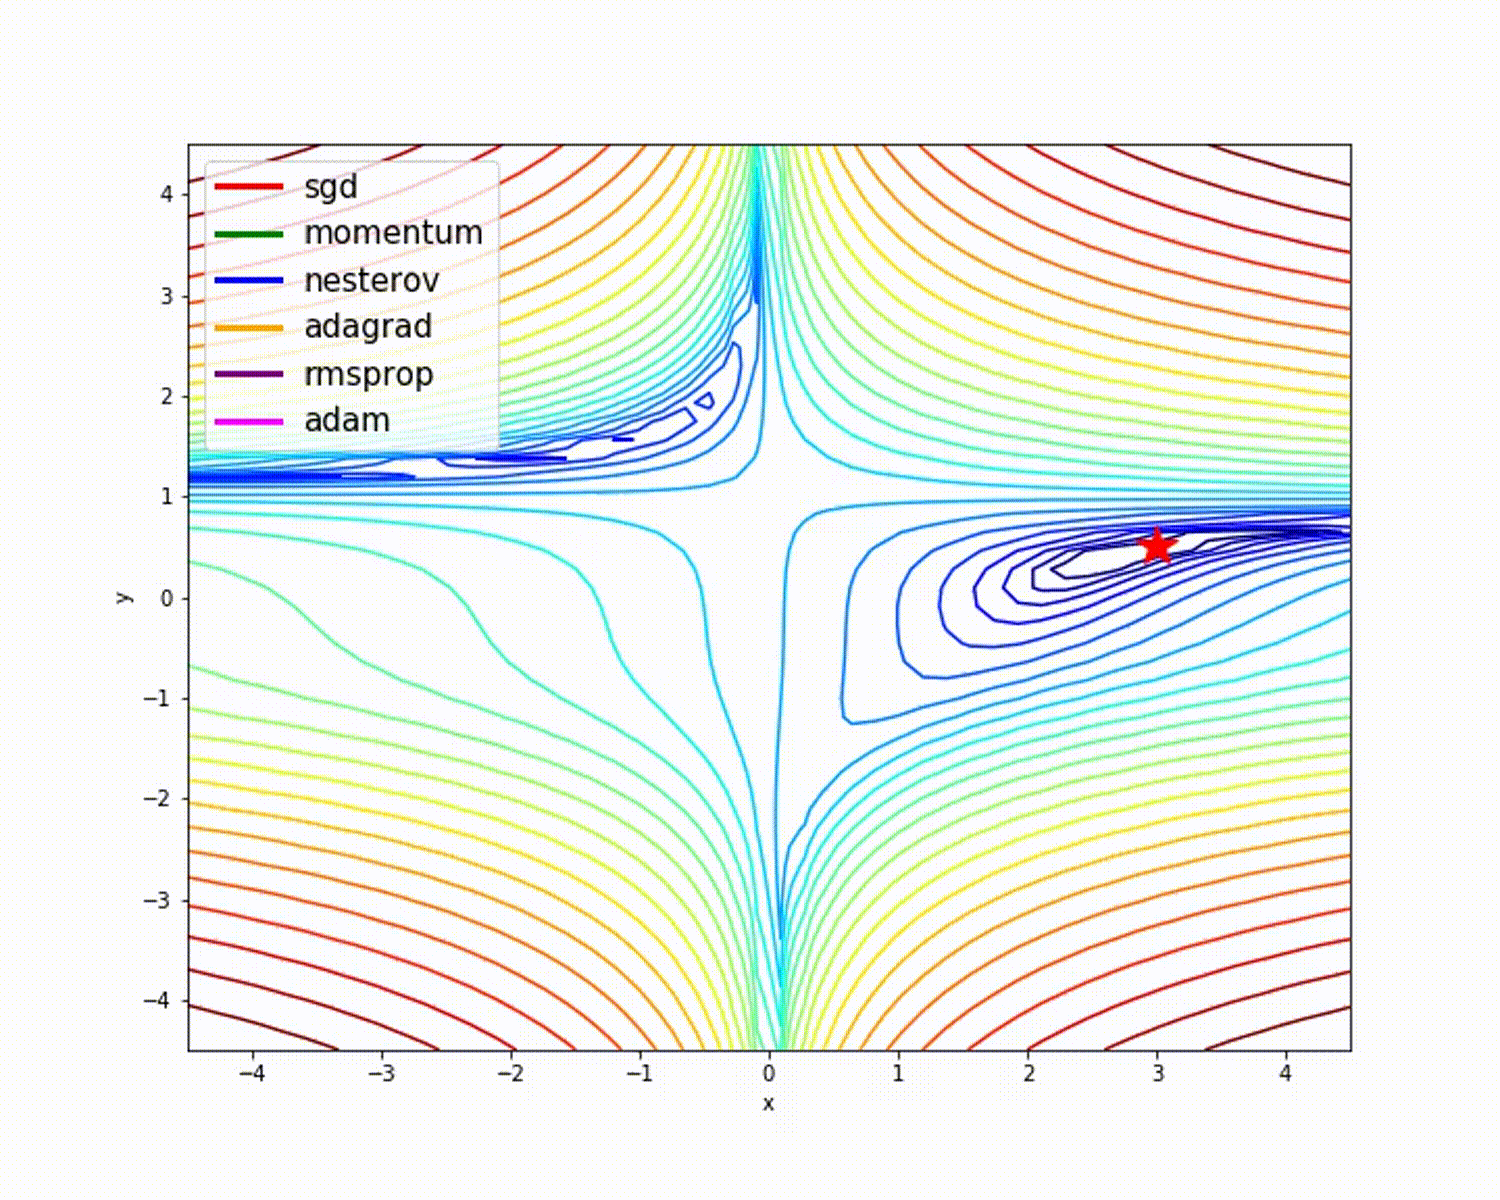 insights from plot | gradient descent